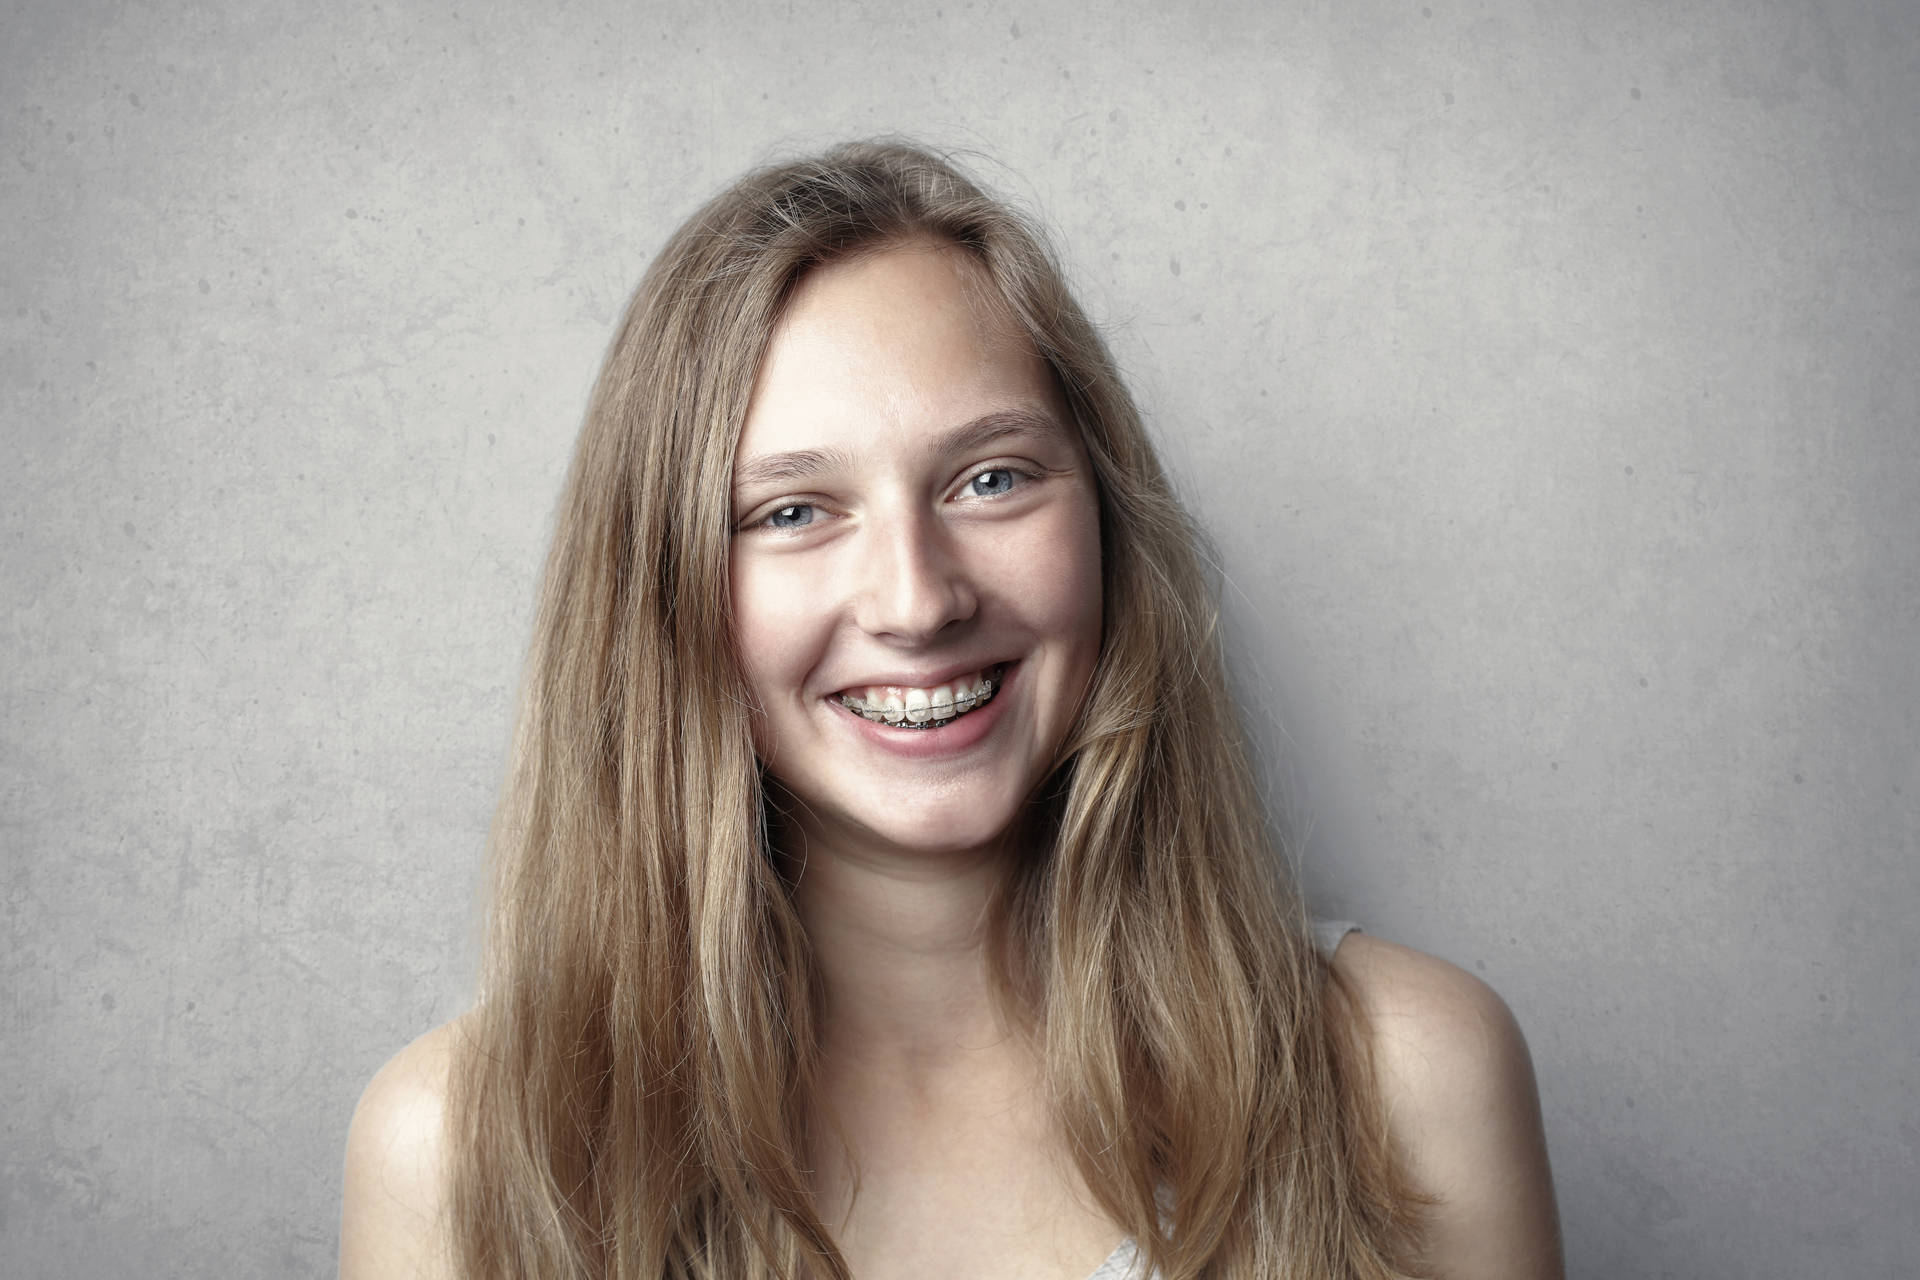 Woman Smiling With Braces Headshot Wallpaper